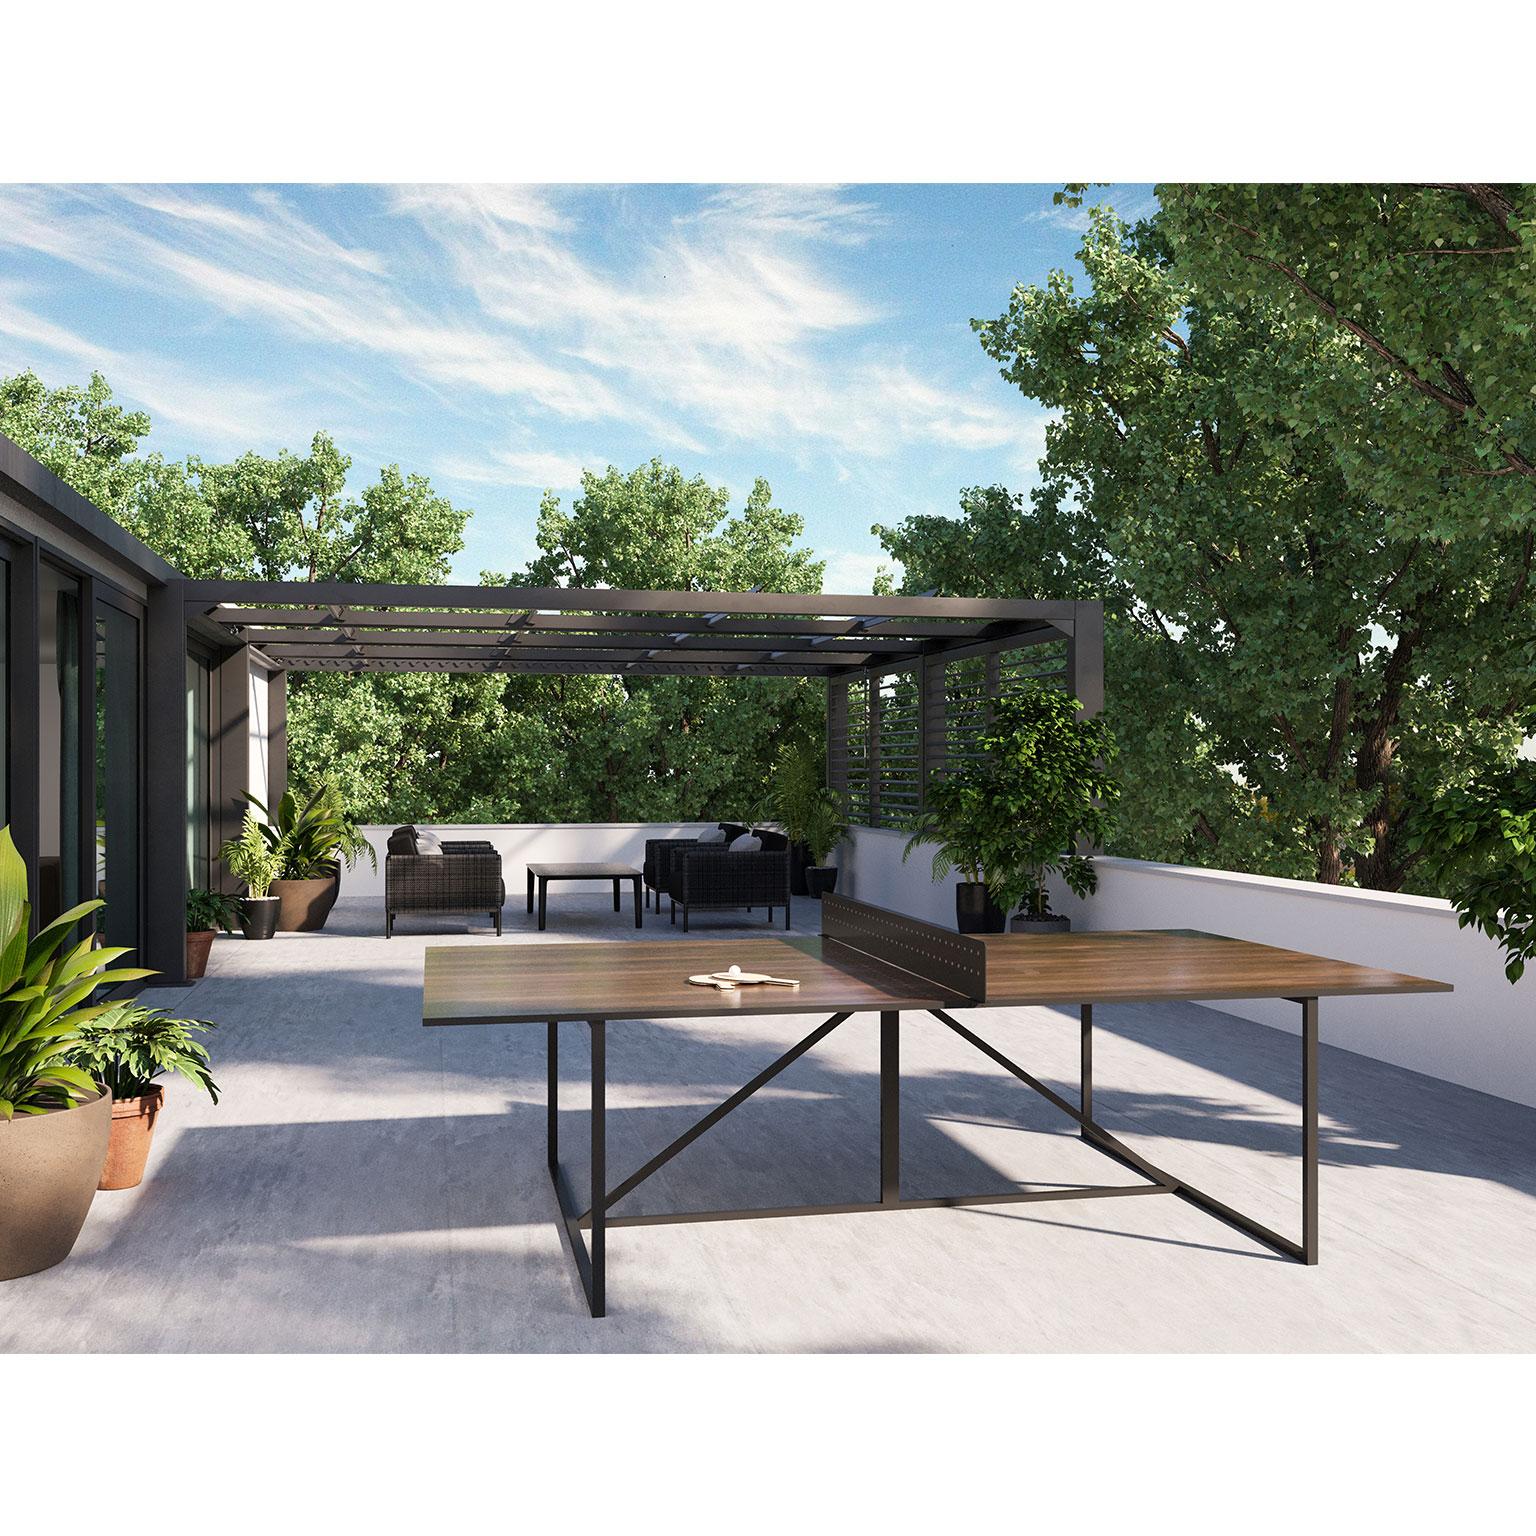 Up the fun factor on your patio with an outdoor ping pong table. Not just any ping pong table: The Break serves up style and ultra-durable materials to take on all types of weather (and opponents)!

The tabletop is constructed from compact laminate,